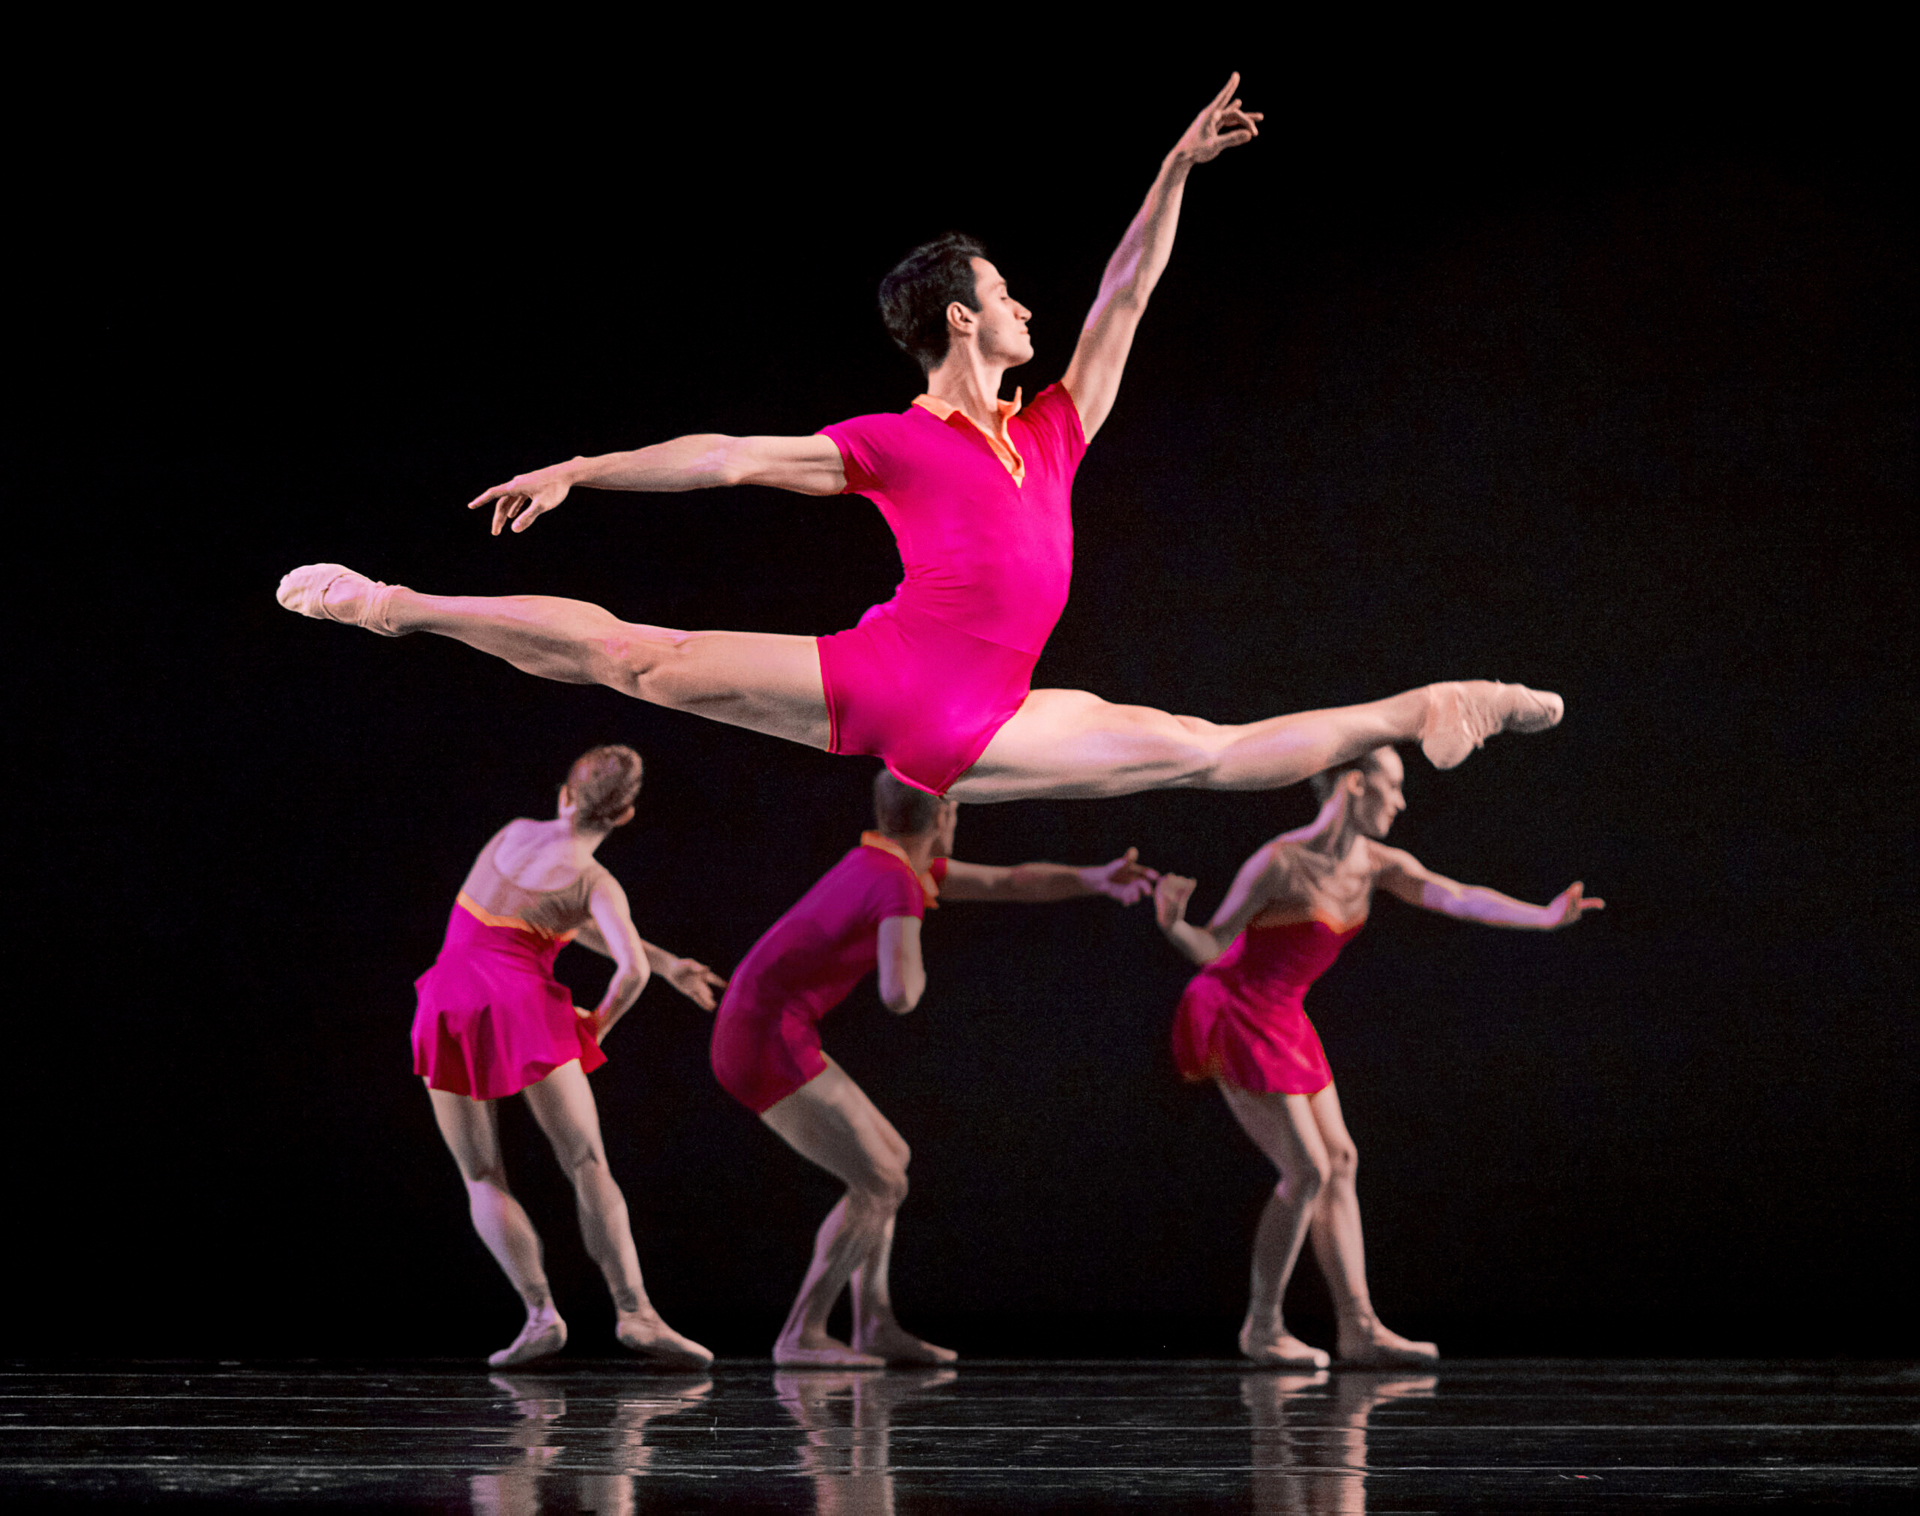 a male dancer wearing a pink unitard performing a grand jete on stage